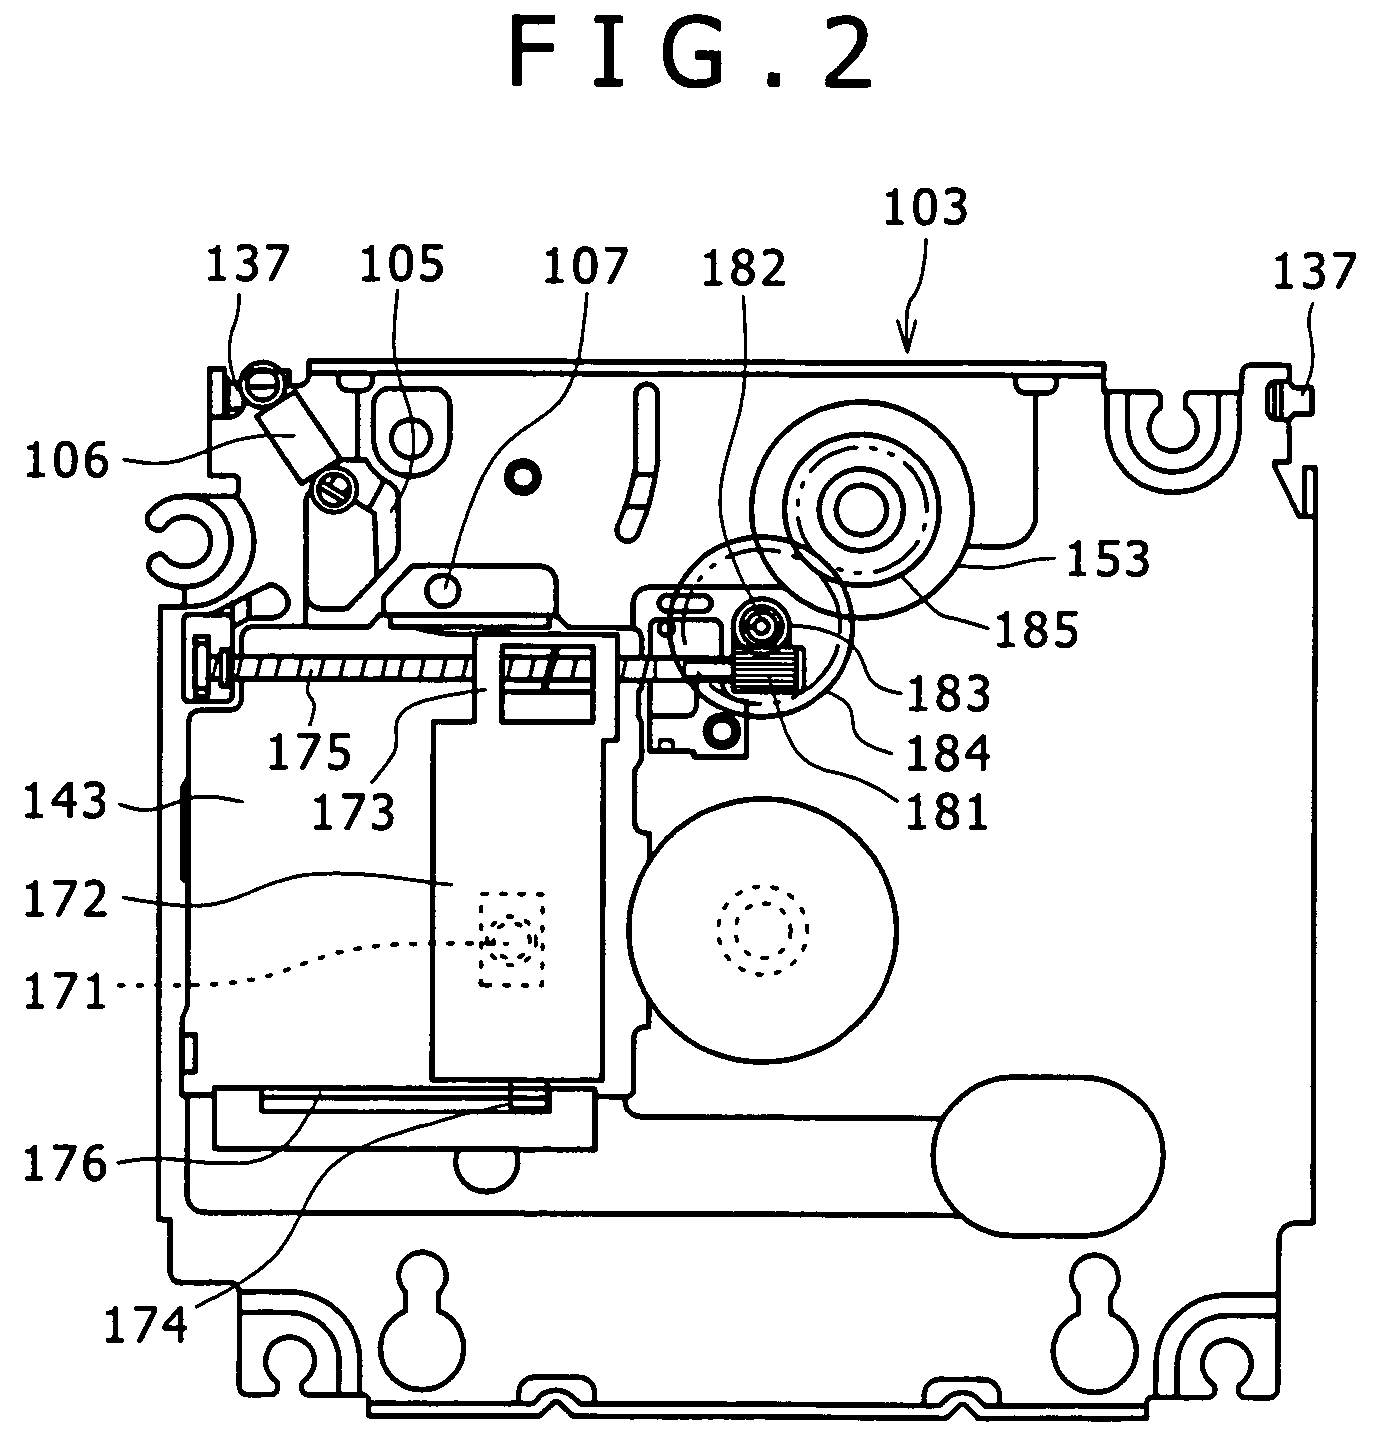 Disk recording and/or reproduction apparatus